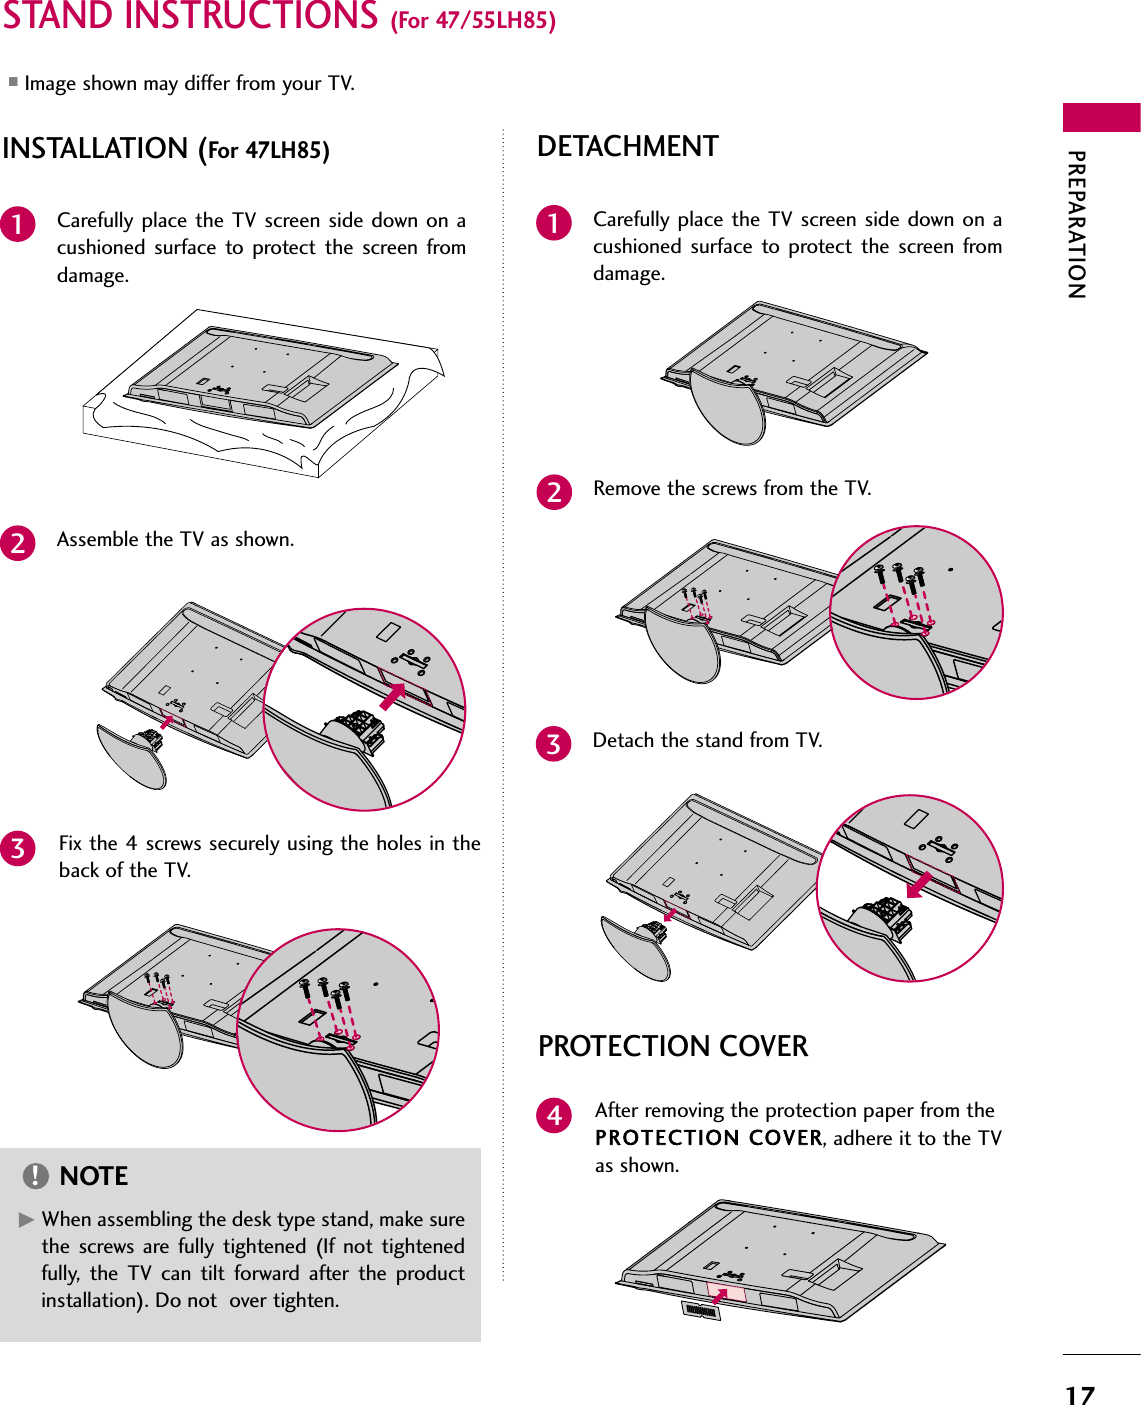 PREPARATION17STAND INSTRUCTIONS (For 47/55LH85)■Image shown may differ from your TV.Carefully place the TV screen side down on acushioned surface to protect the screen fromdamage.Assemble the TV as shown.Fix the 4 screws securely using the holes in theback of the TV.123INSTALLATION (For 47LH85)GWhen assembling the desk type stand, make surethe screws are fully tightened (If not tightenedfully, the TV can tilt forward after the productinstallation). Do not  over tighten.NOTE!DETACHMENTCarefully place the TV screen side down on acushioned surface to protect the screen fromdamage.1Remove the screws from the TV.2Detach the stand from TV.3PROTECTION COVERAfter removing the protection paper from thePROTECTION COVER, adhere it to the TVas shown.4